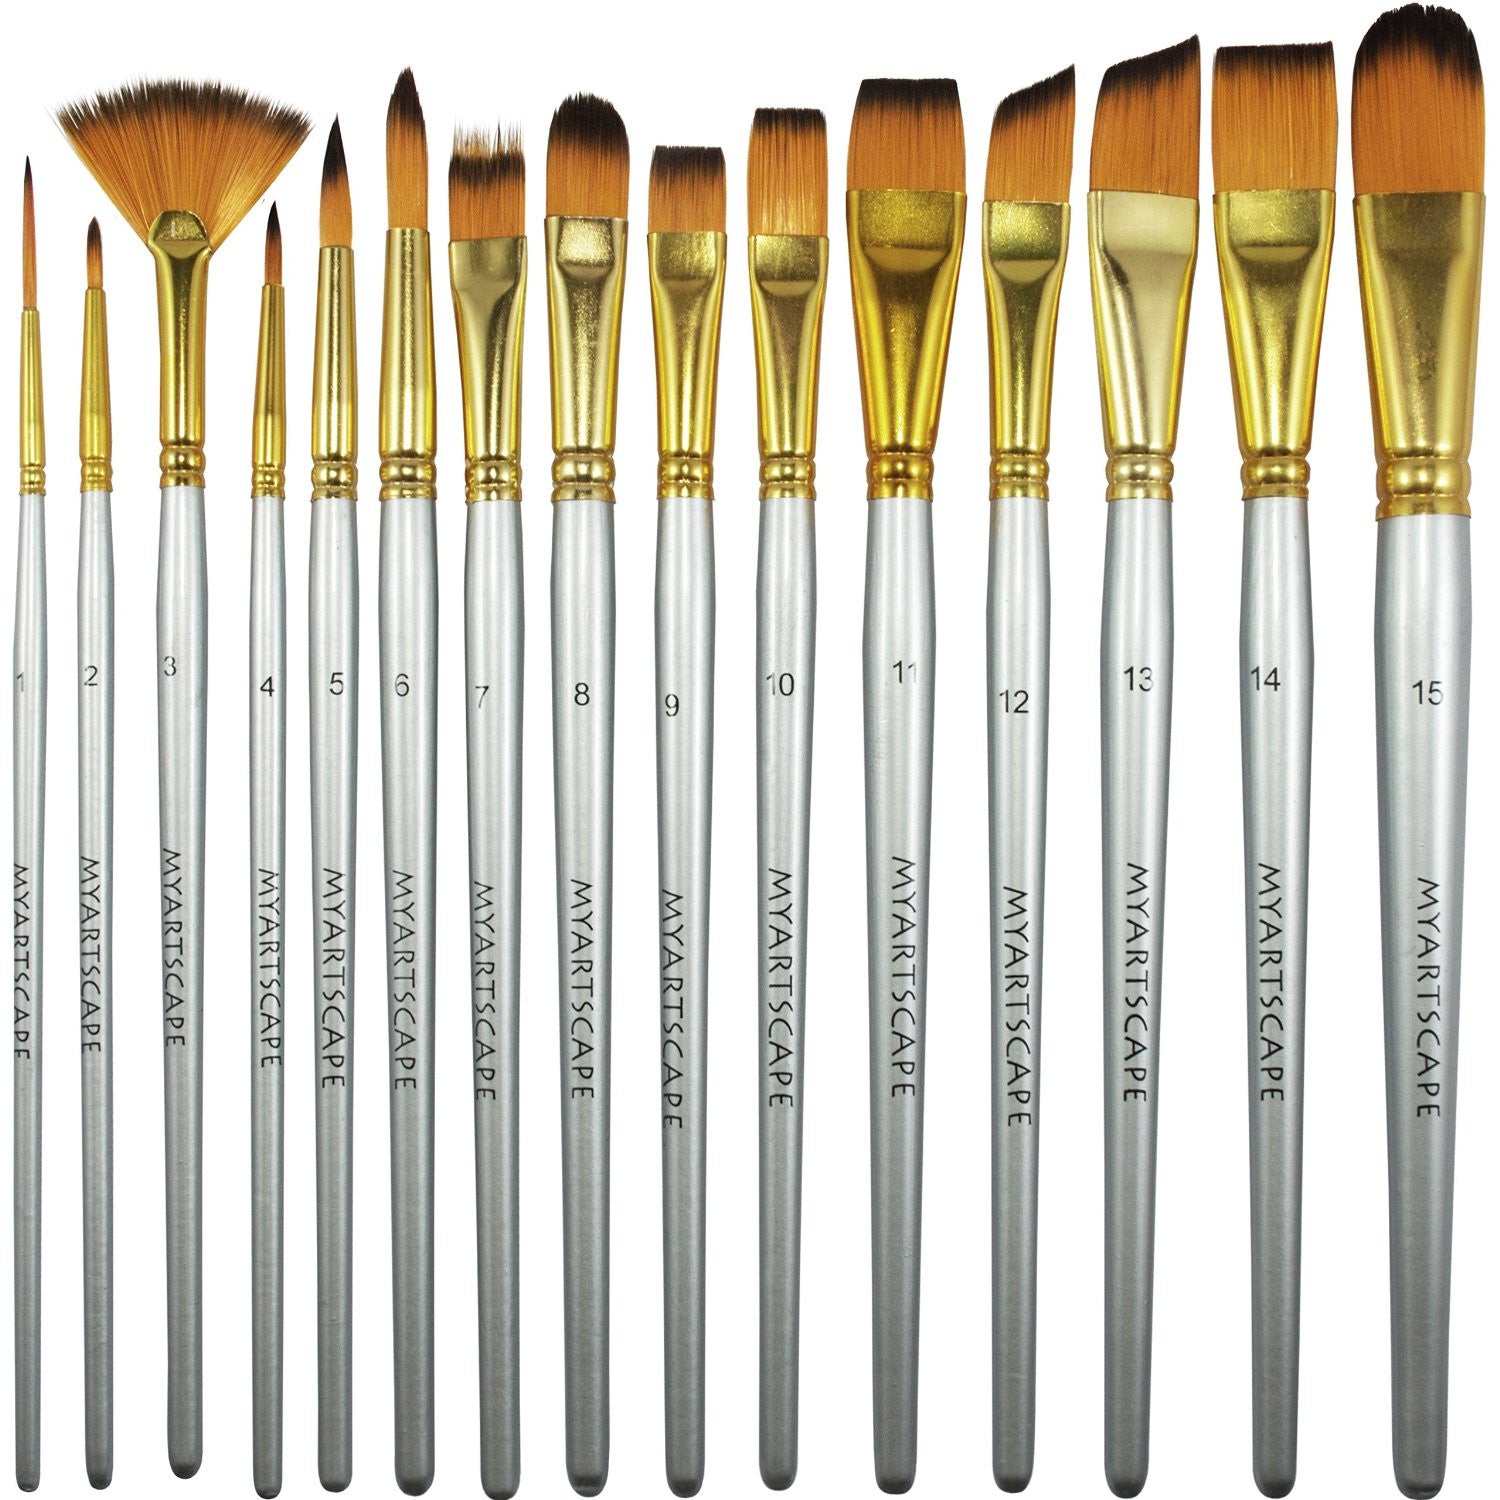 Short Handle Paintbrushes for Every Artist